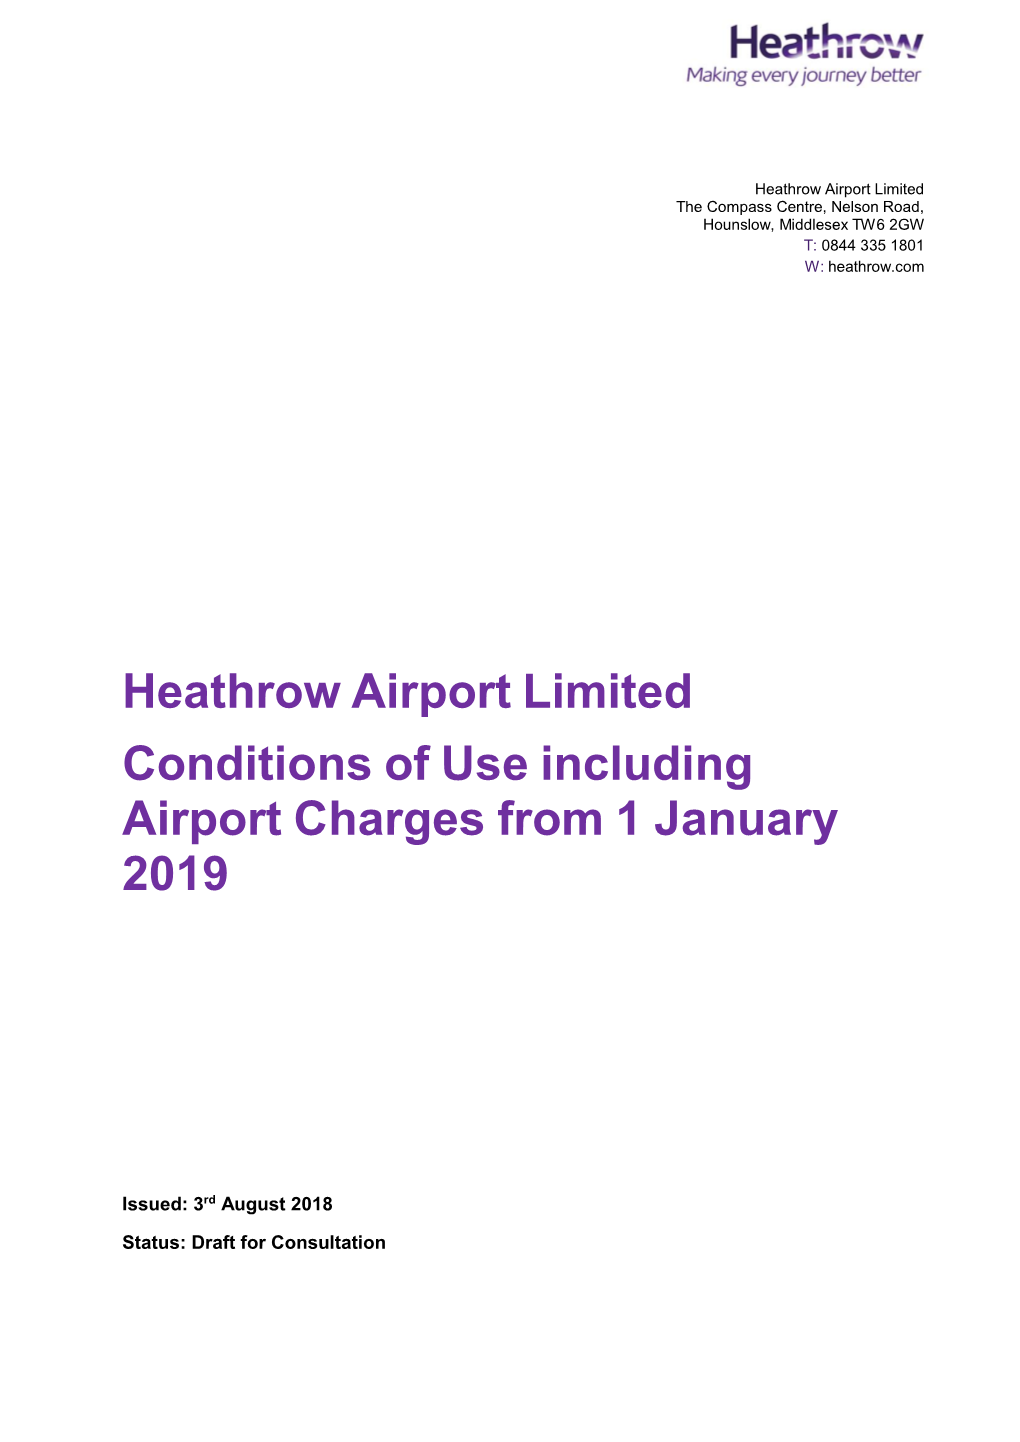 Heathrow Airport Limited Conditions of Use Including Airport Charges from 1 January 2019